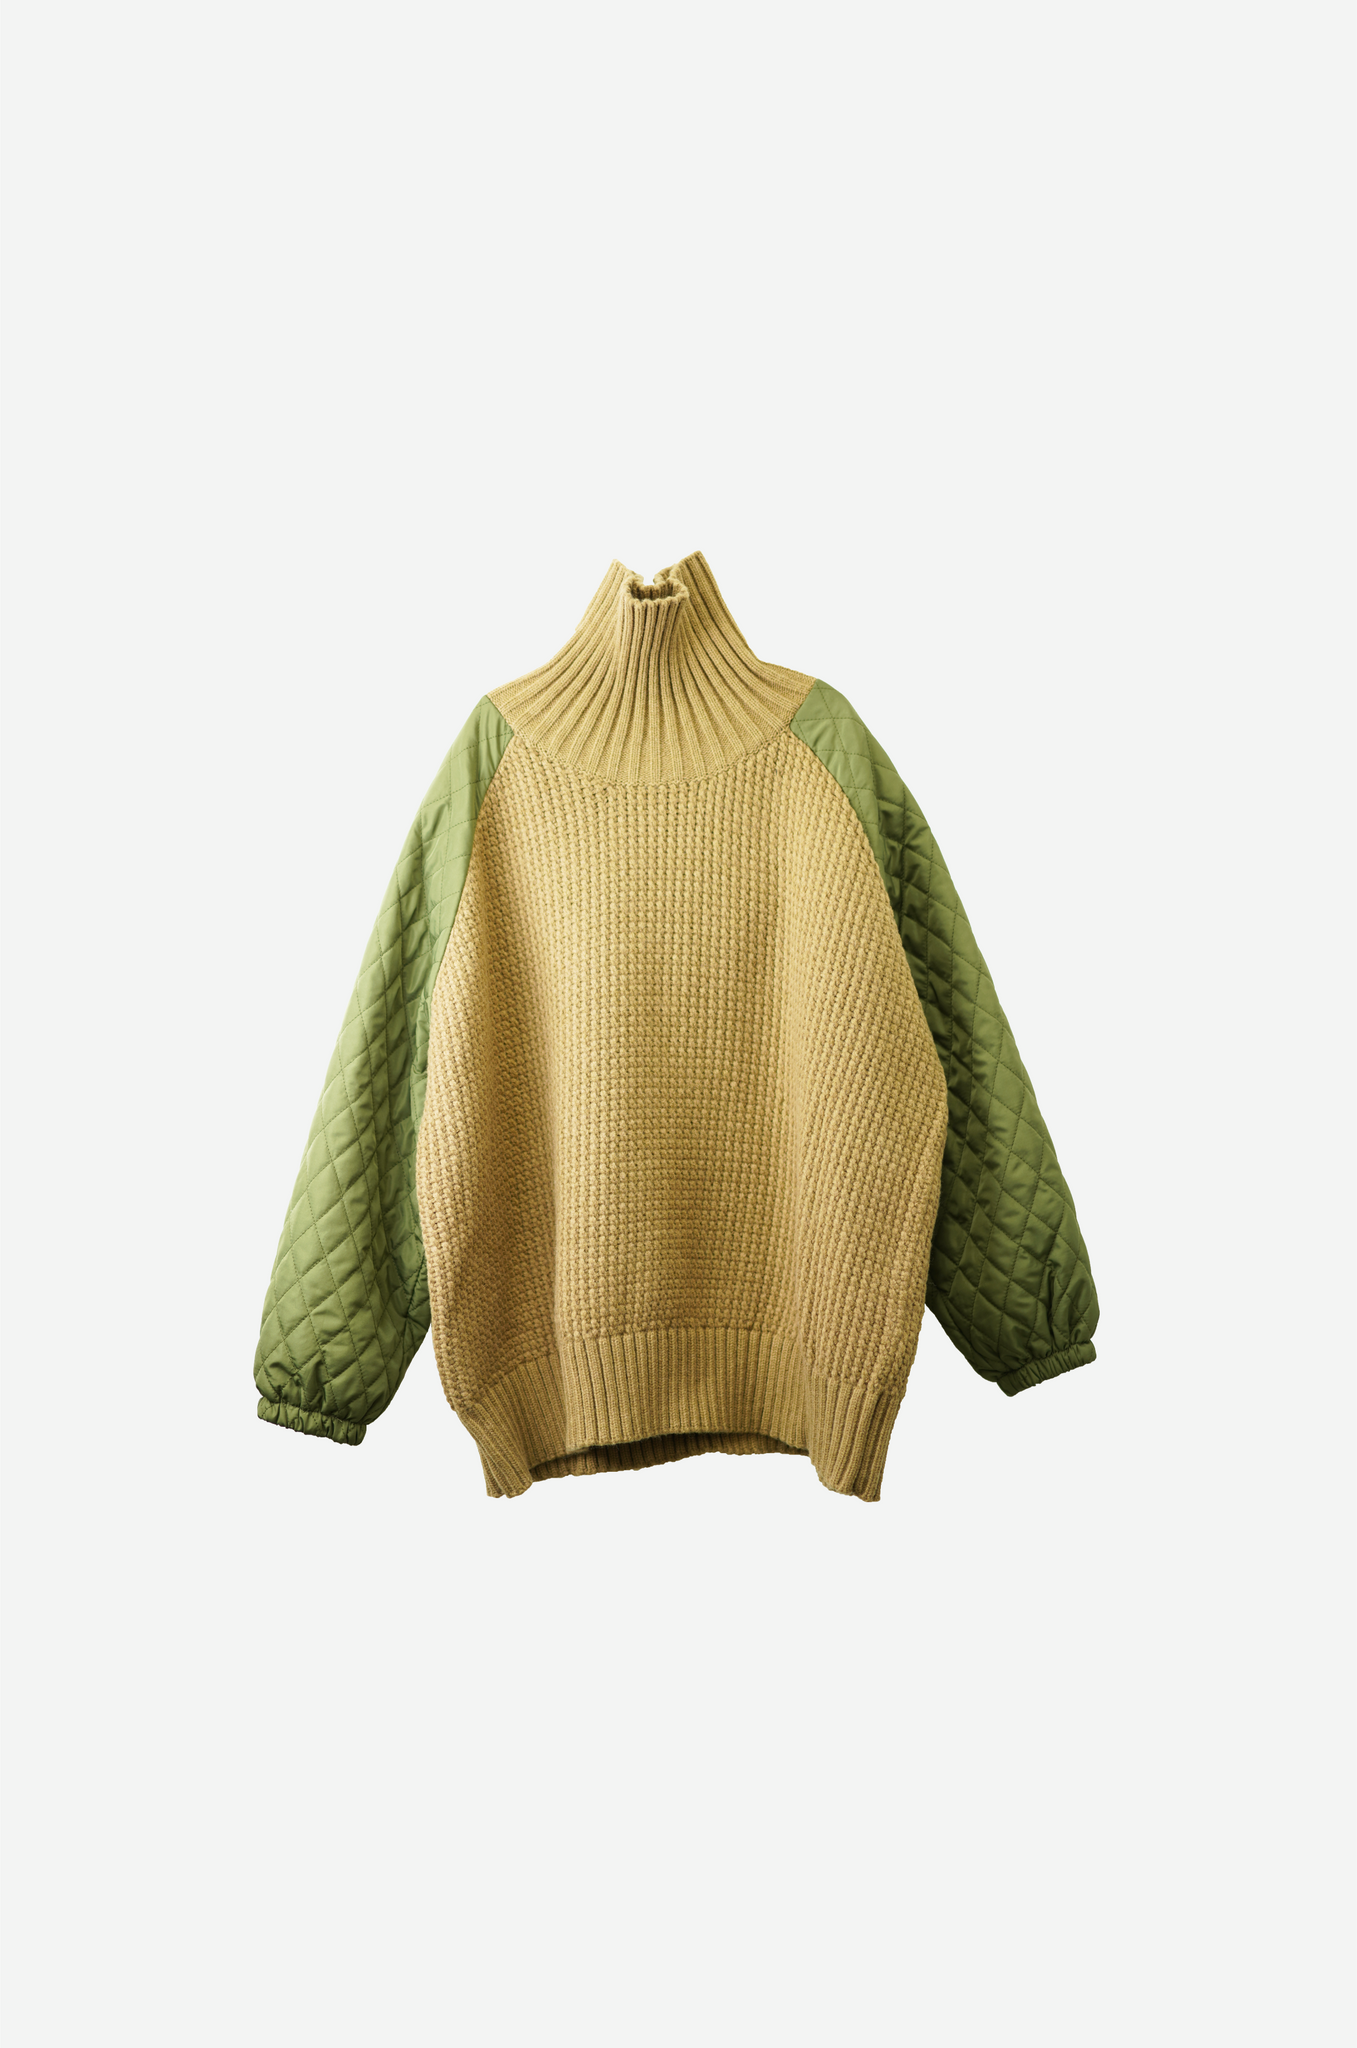 ・ Reserved items Quilted High-neck Knit